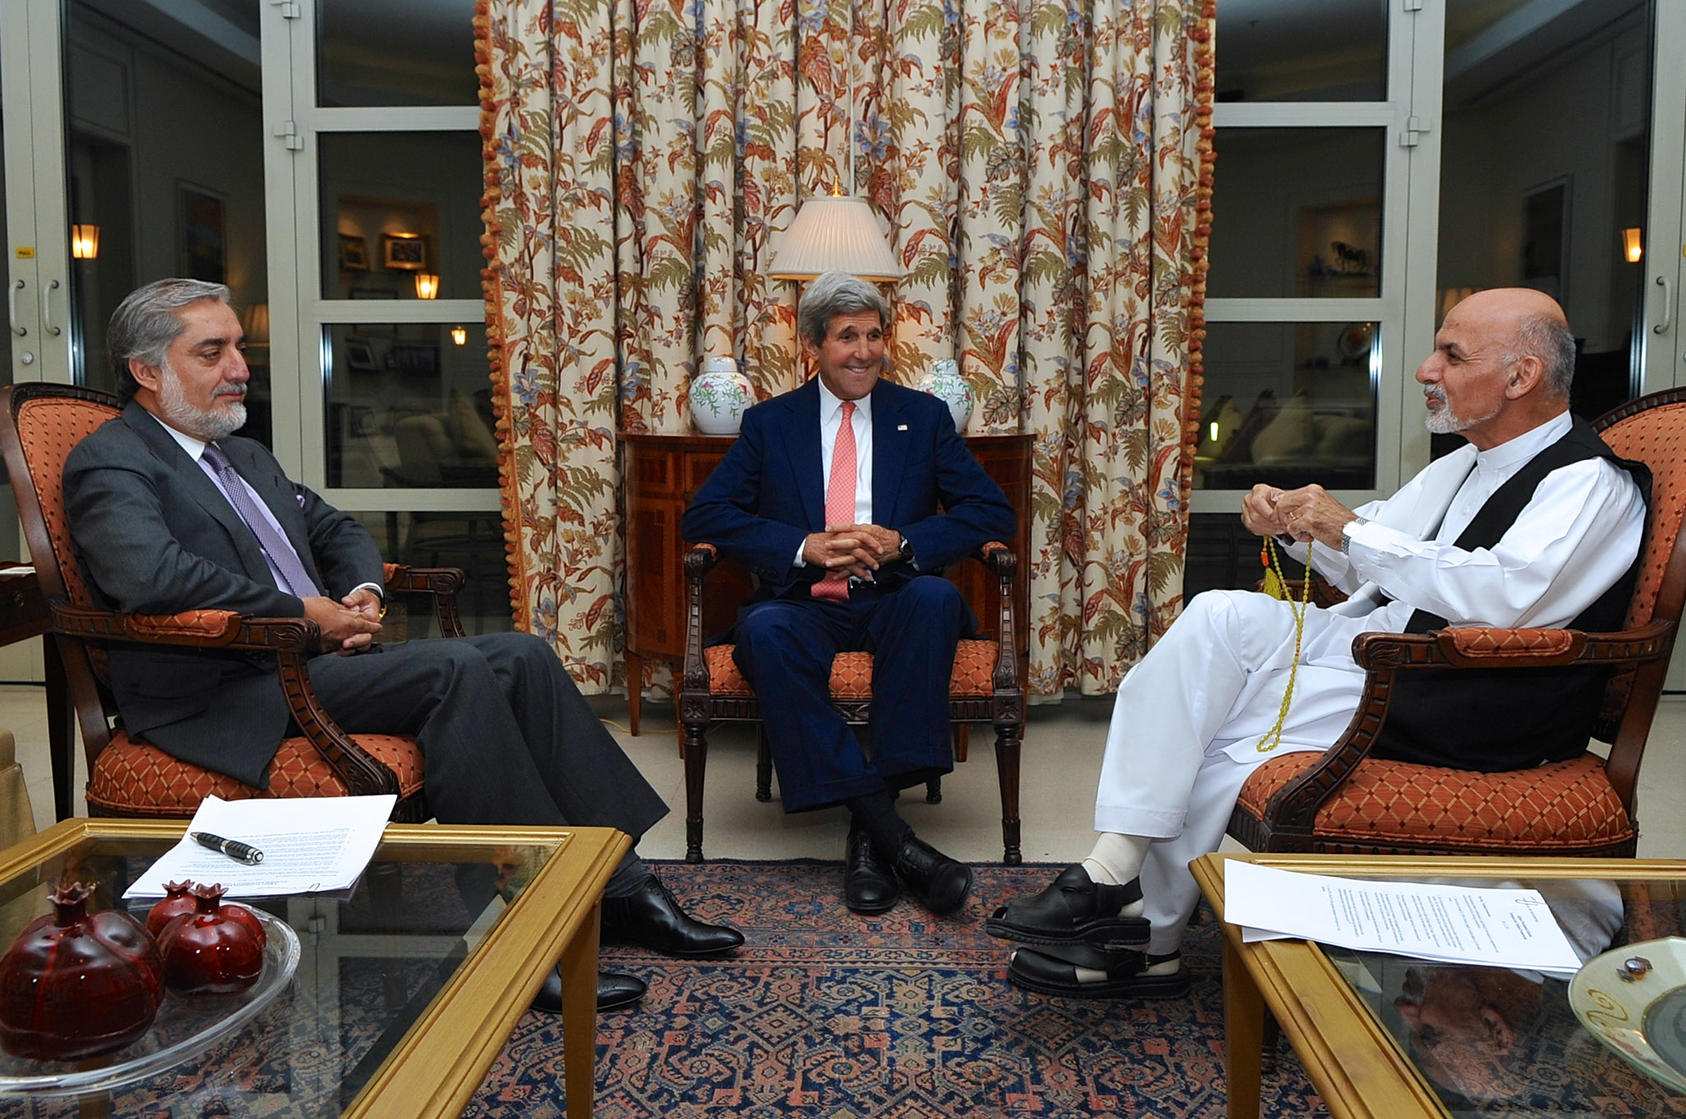 Former Secretary of State John Kerry sits with Afghan Abdullah Abdullah, left, and Ashraf Ghani, right, in Kabul, Afghanistan on July 12, 2014, after he helped broker an agreement to resolve the disputed presidential election. (U.S. State Department)